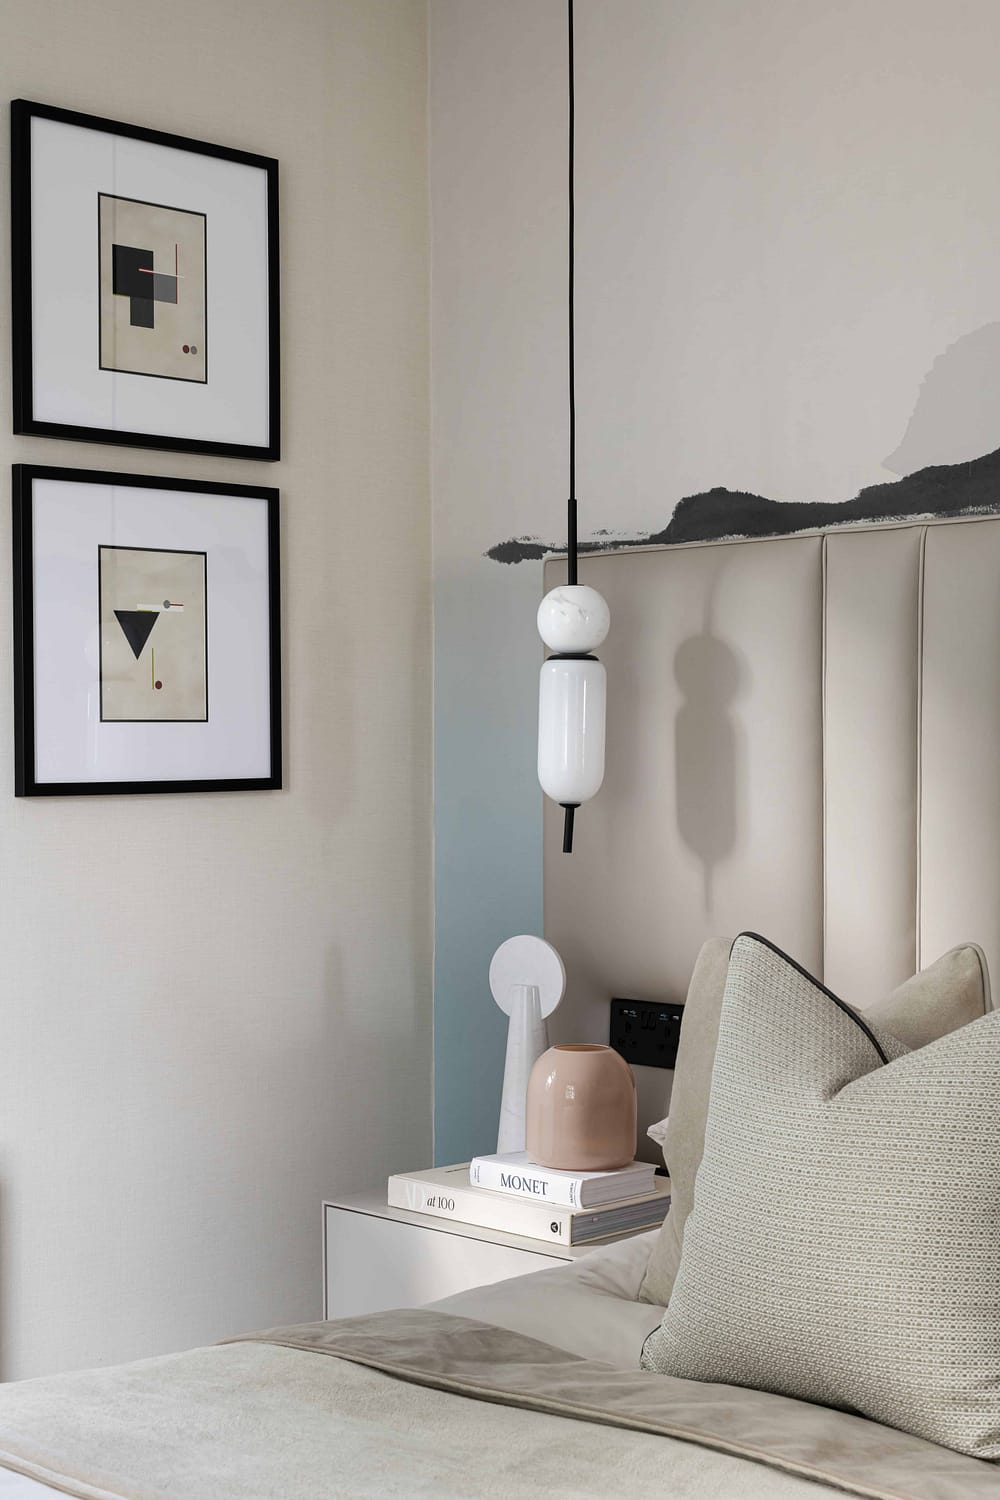 Our interior designers in Hatfield use pendant lighting in the guest room.